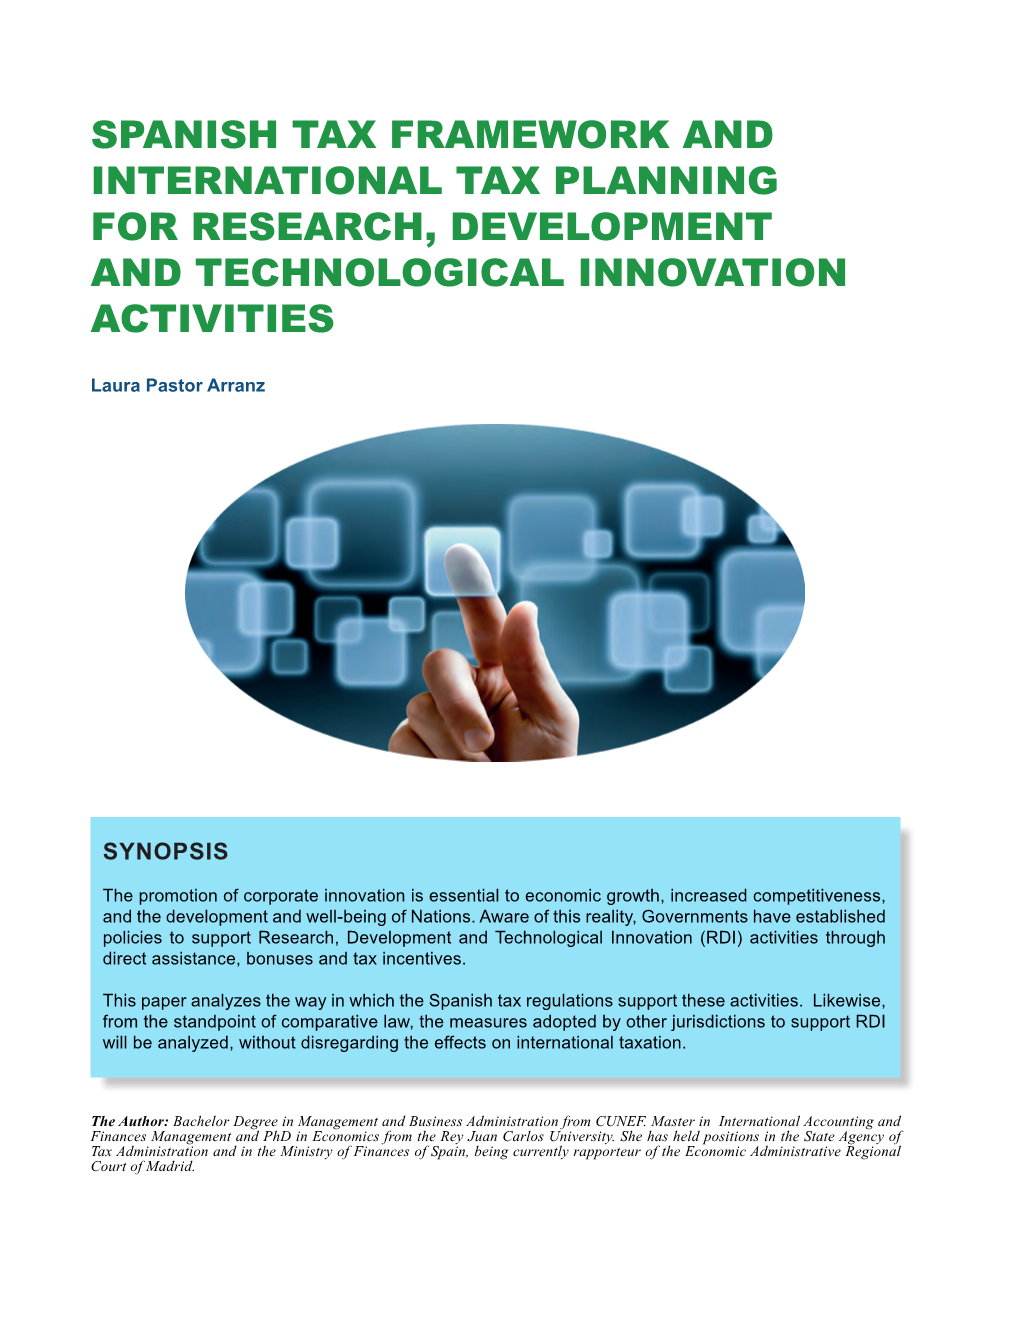 Spanish Tax Framework and International Tax Planning for Research, Development and Technological Innovation Activities